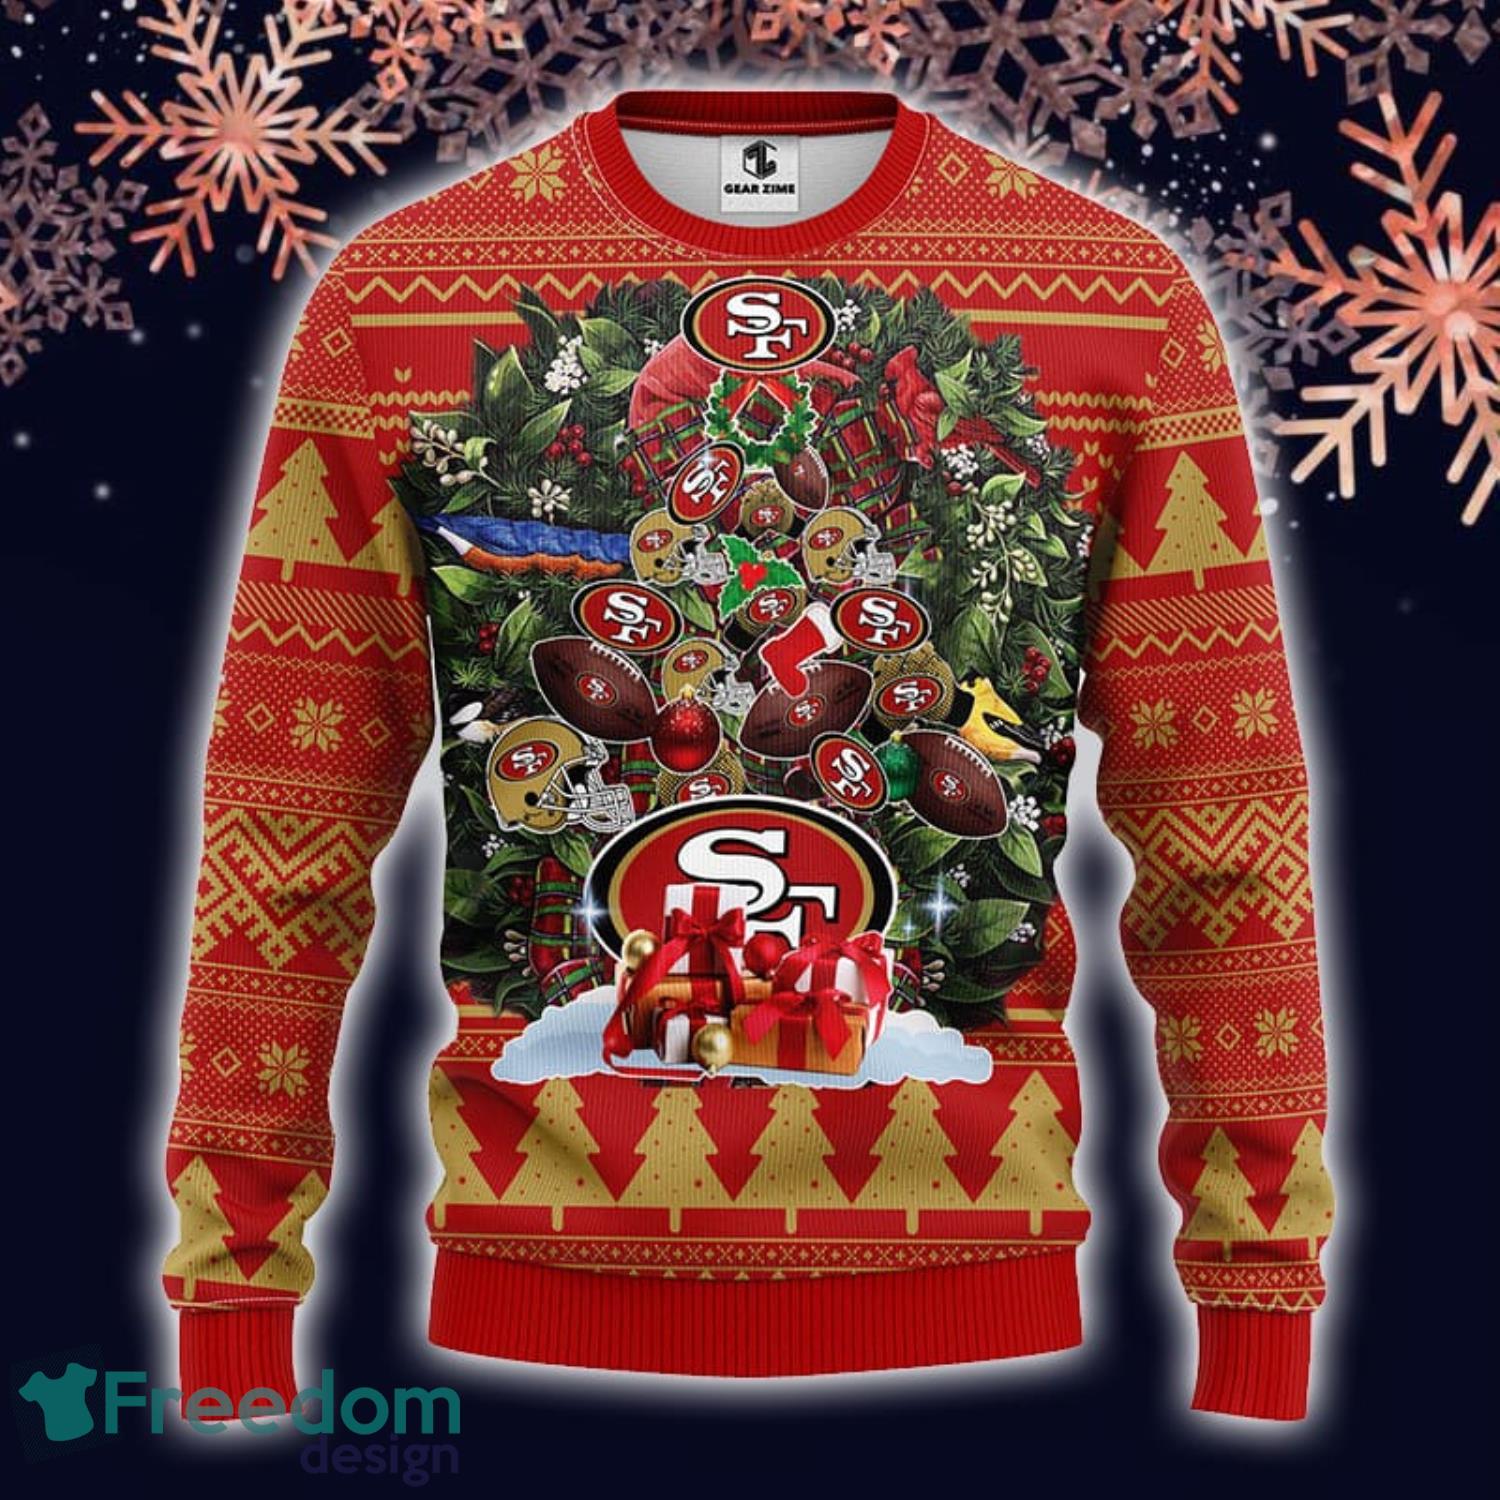 NHL New Jersey Devils Funny Minion Ugly Christmas Sweater For Fans